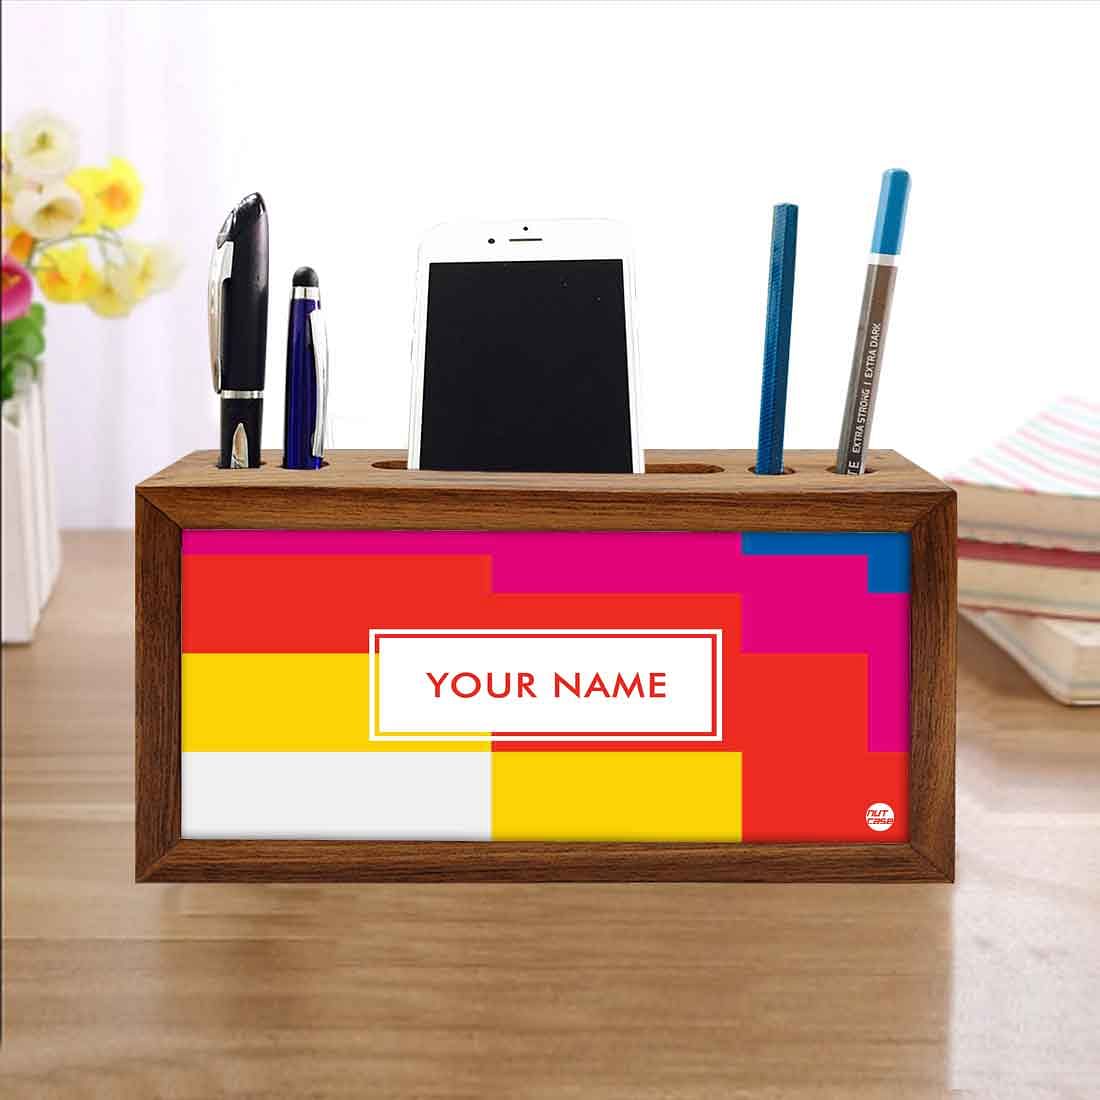 Personalized Wooden Stationery Organiser - Colorful Shapes Nutcase